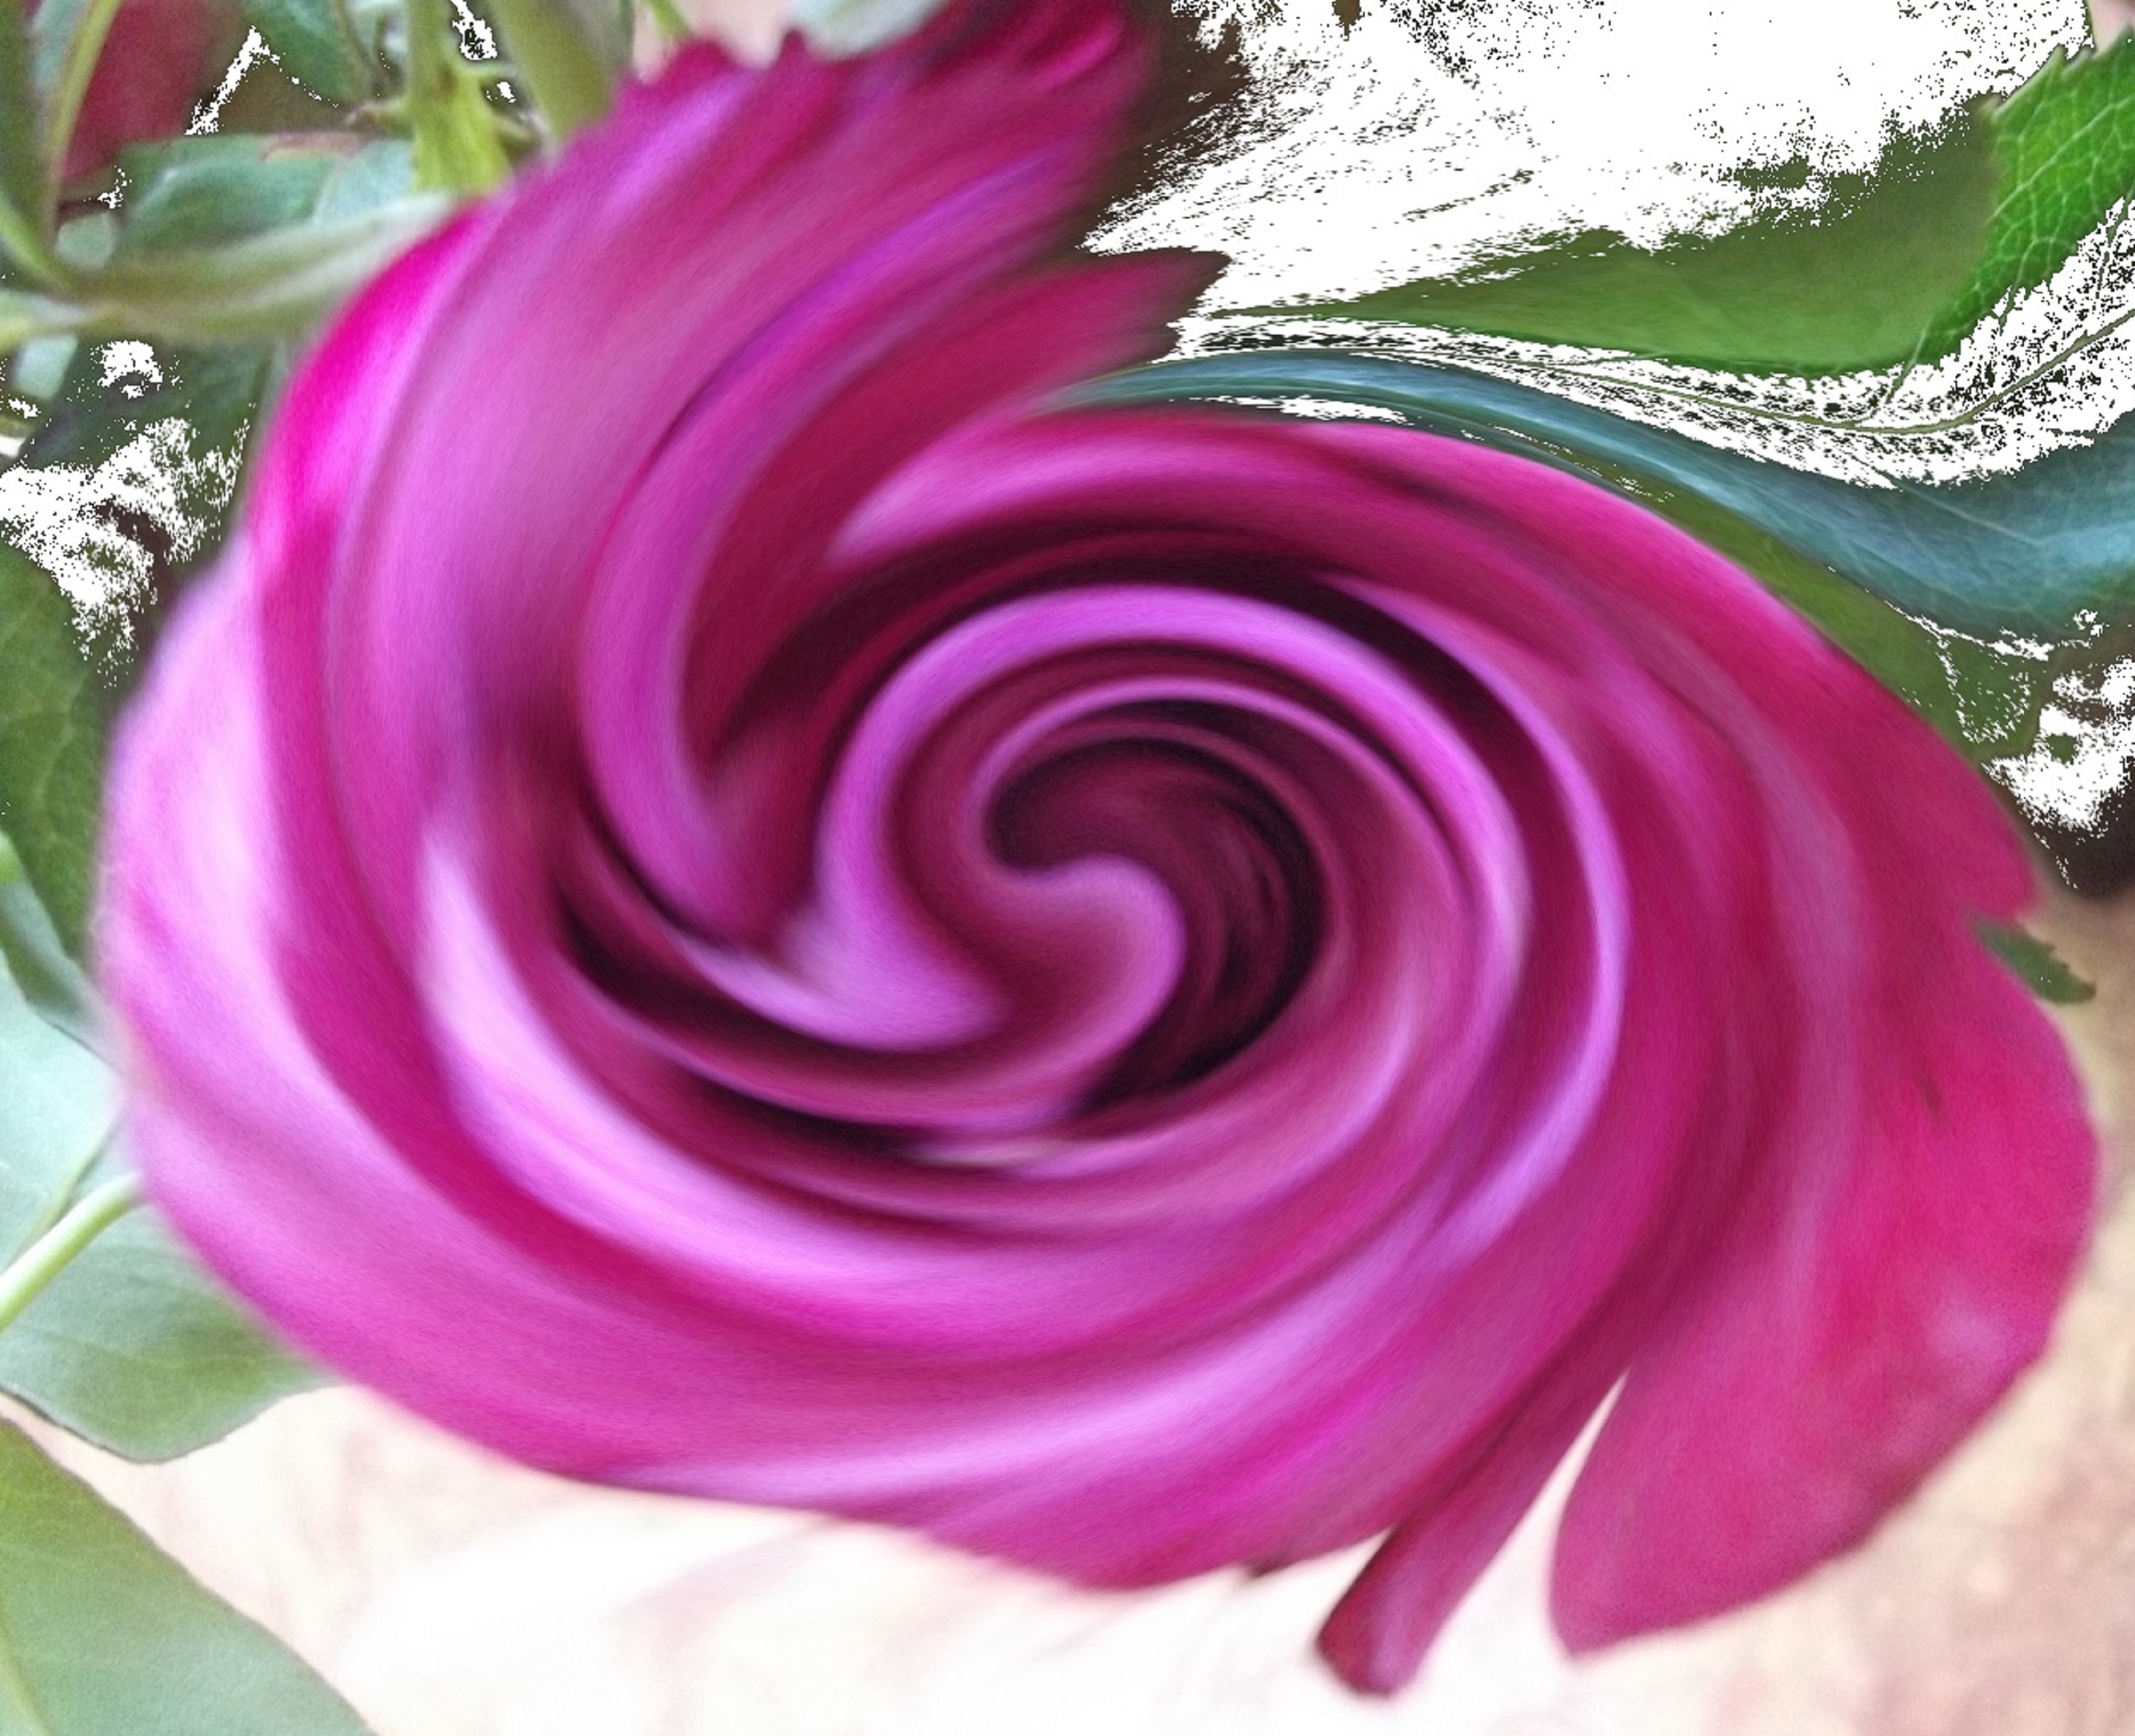 Photo taken by me with Transparent background and swirl Effects 7-7-17